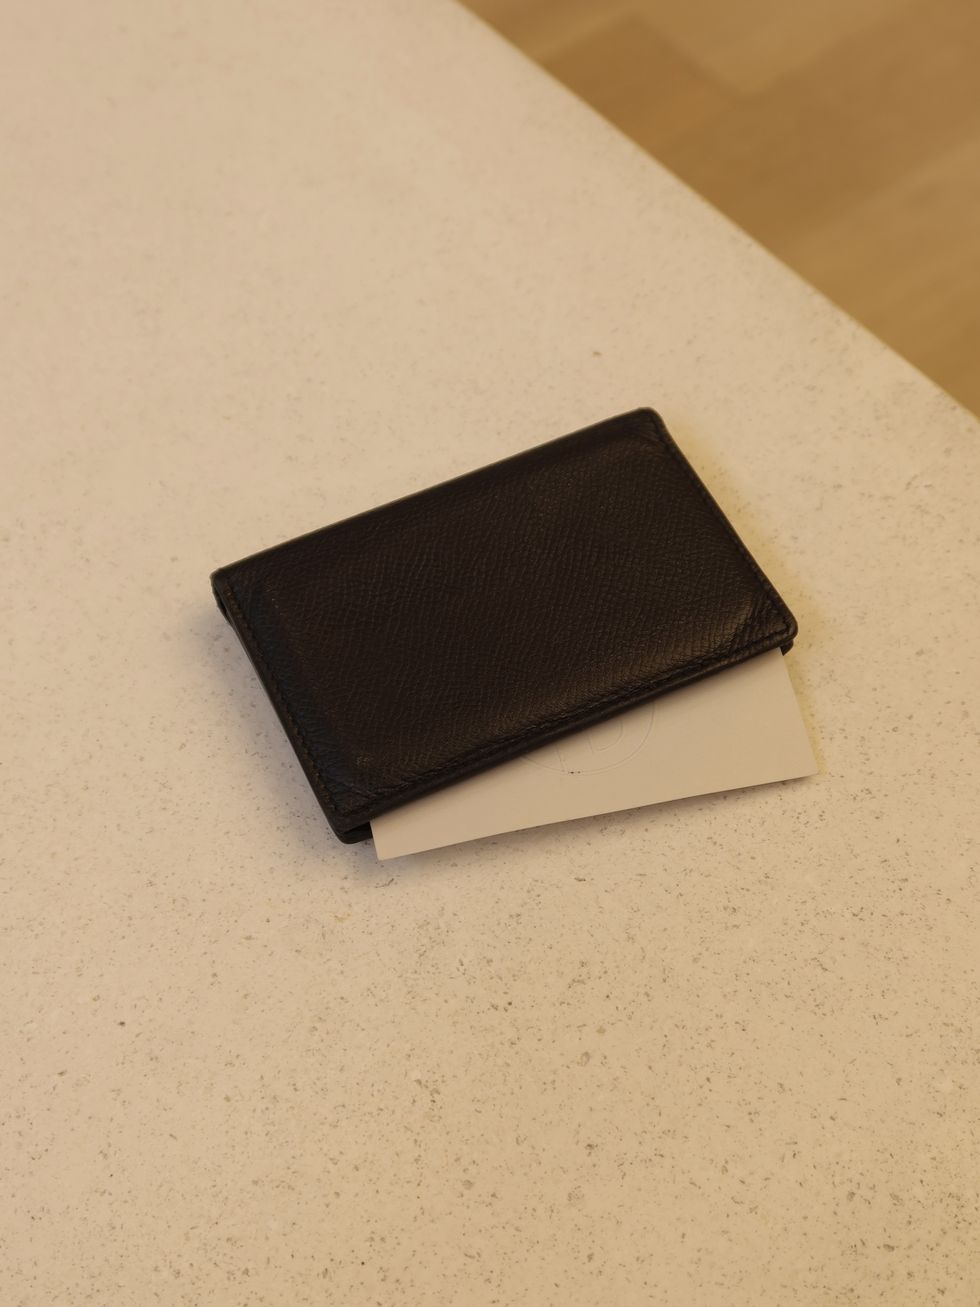 a black square object on a white surface